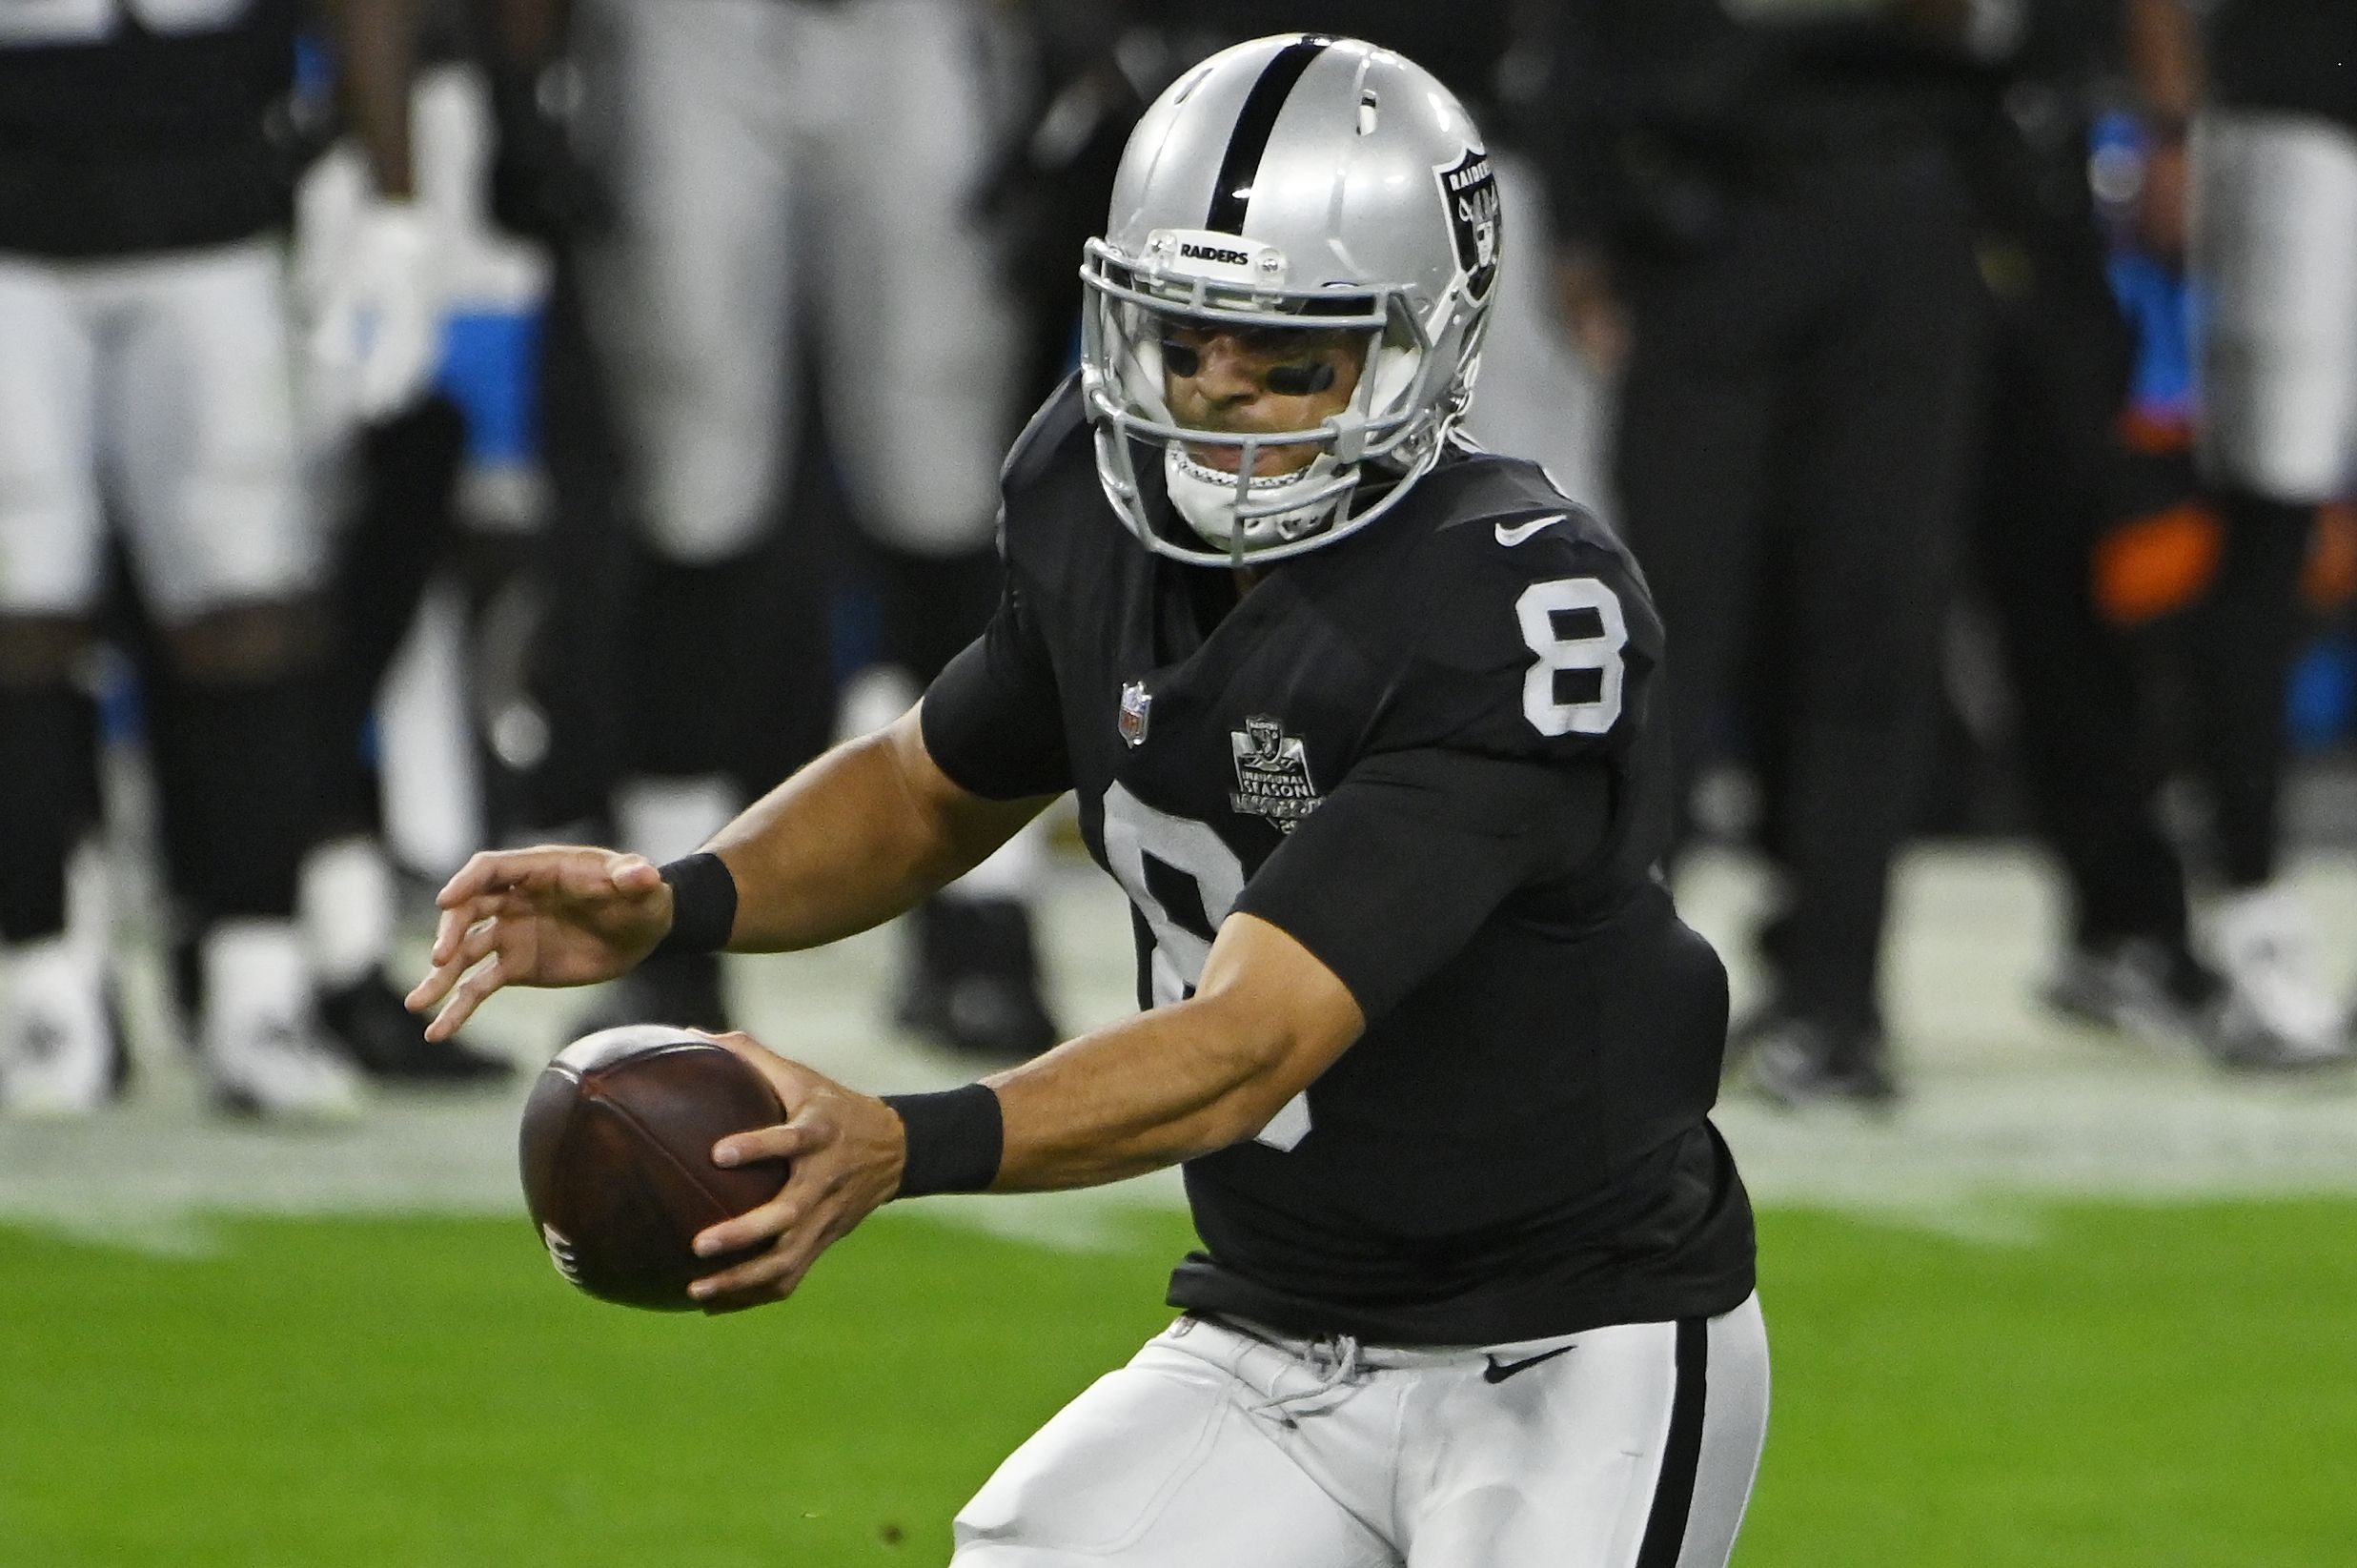 Derek Carr injured vs. Chargers, Marcus Mariota takes over